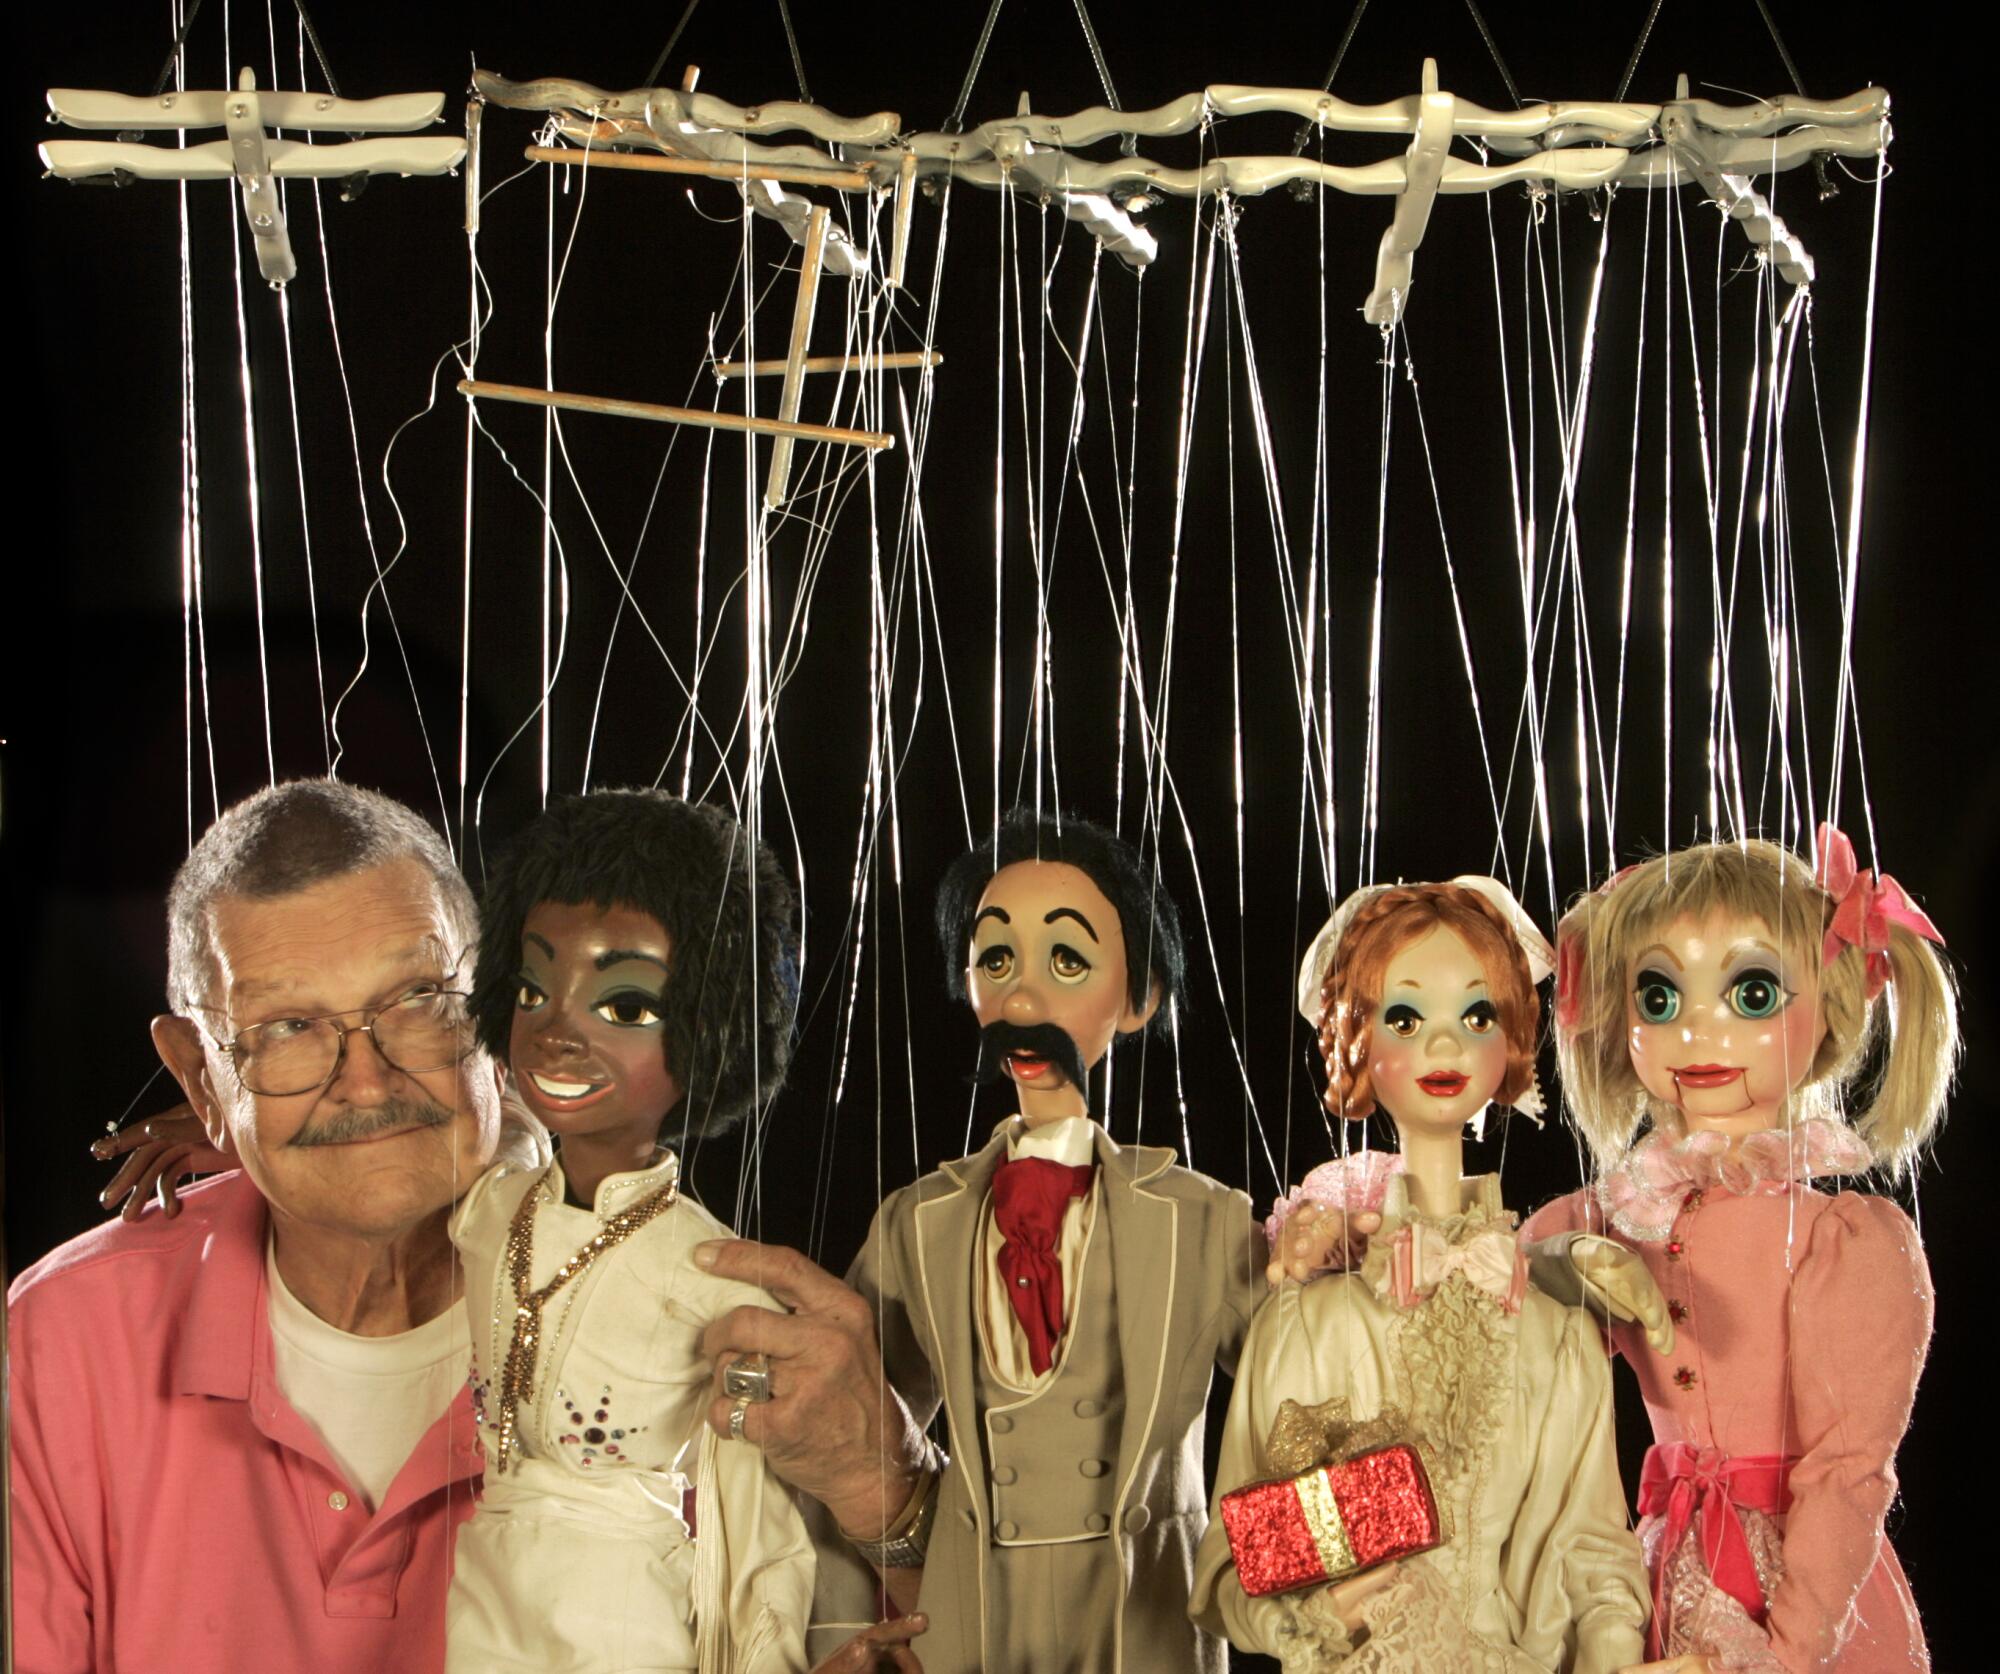 Bob Baker, 84, owner and creator of the Bob Baker Marionette Theatre 